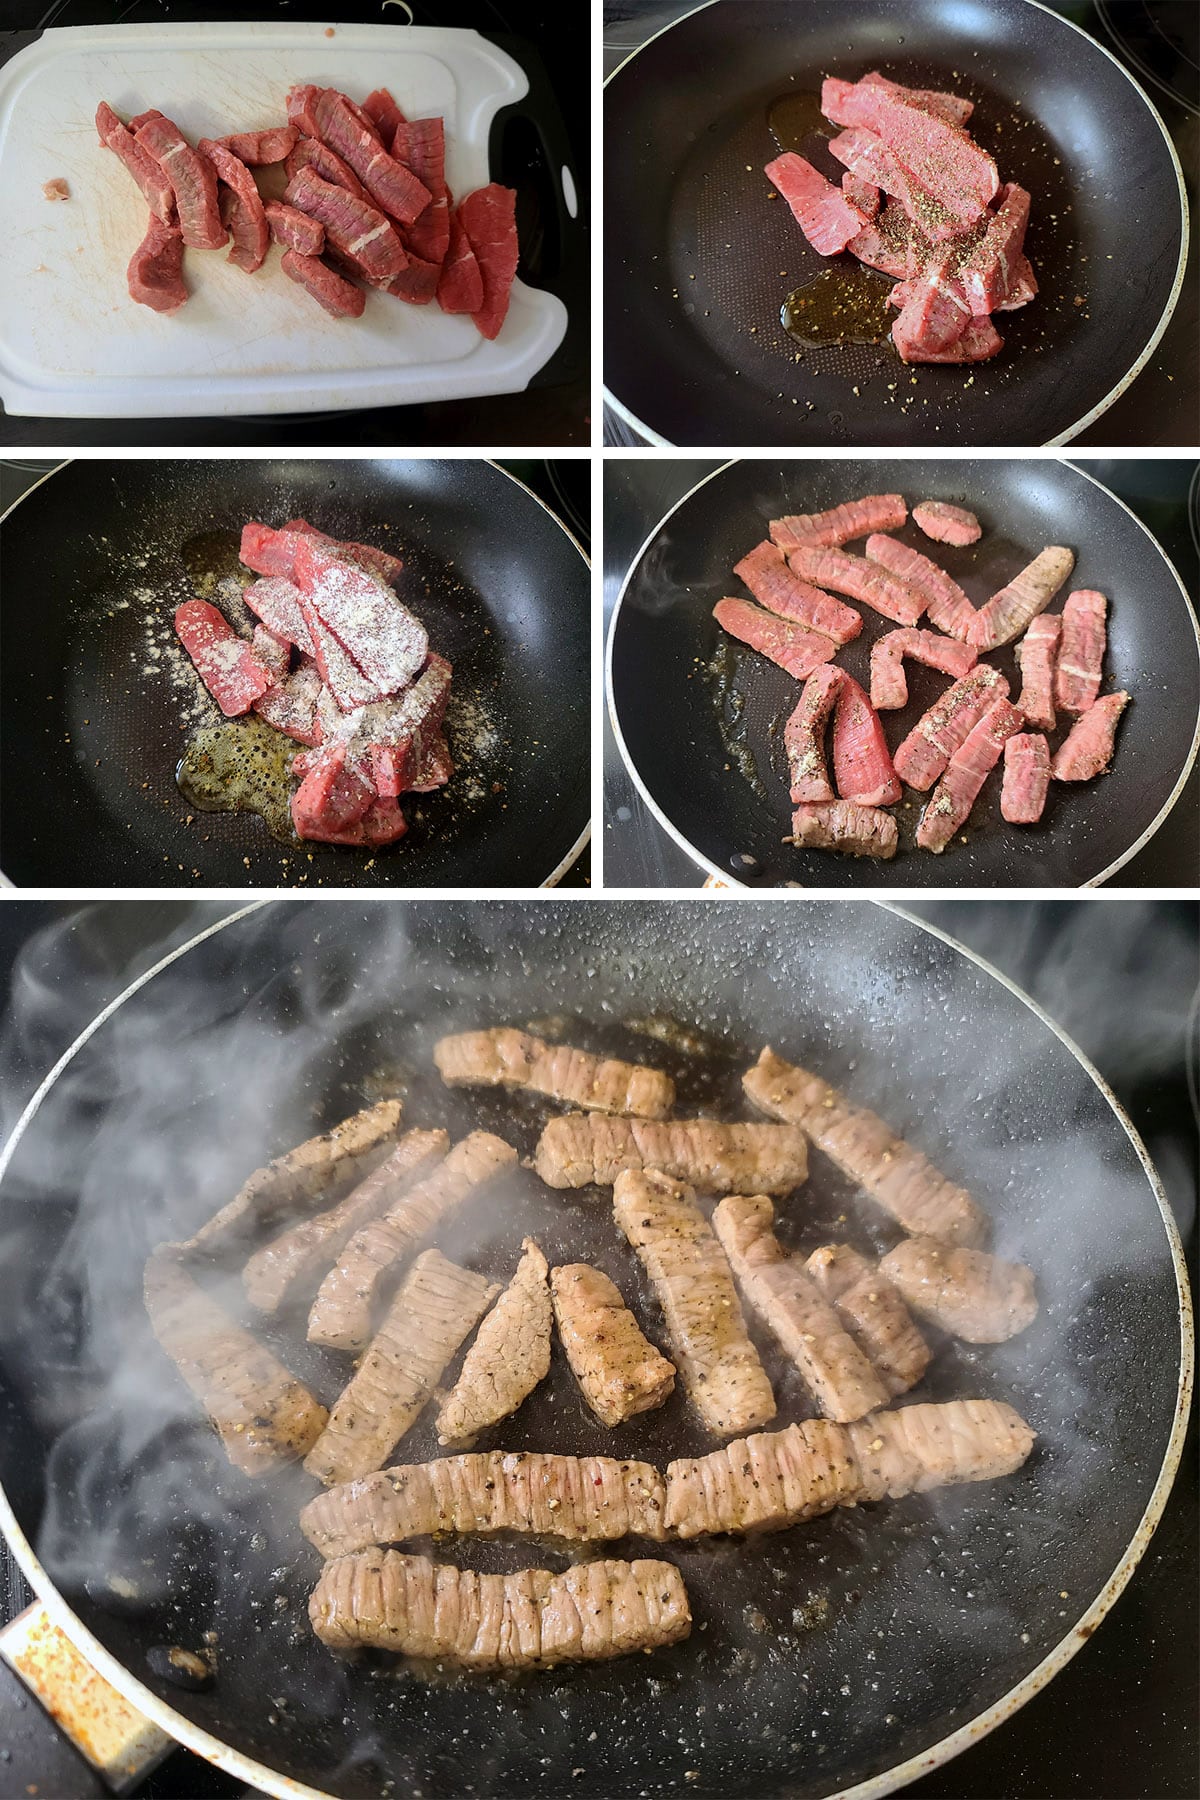 A 5 part image showing the steak being sliced, seasoned, and seared in a pan.